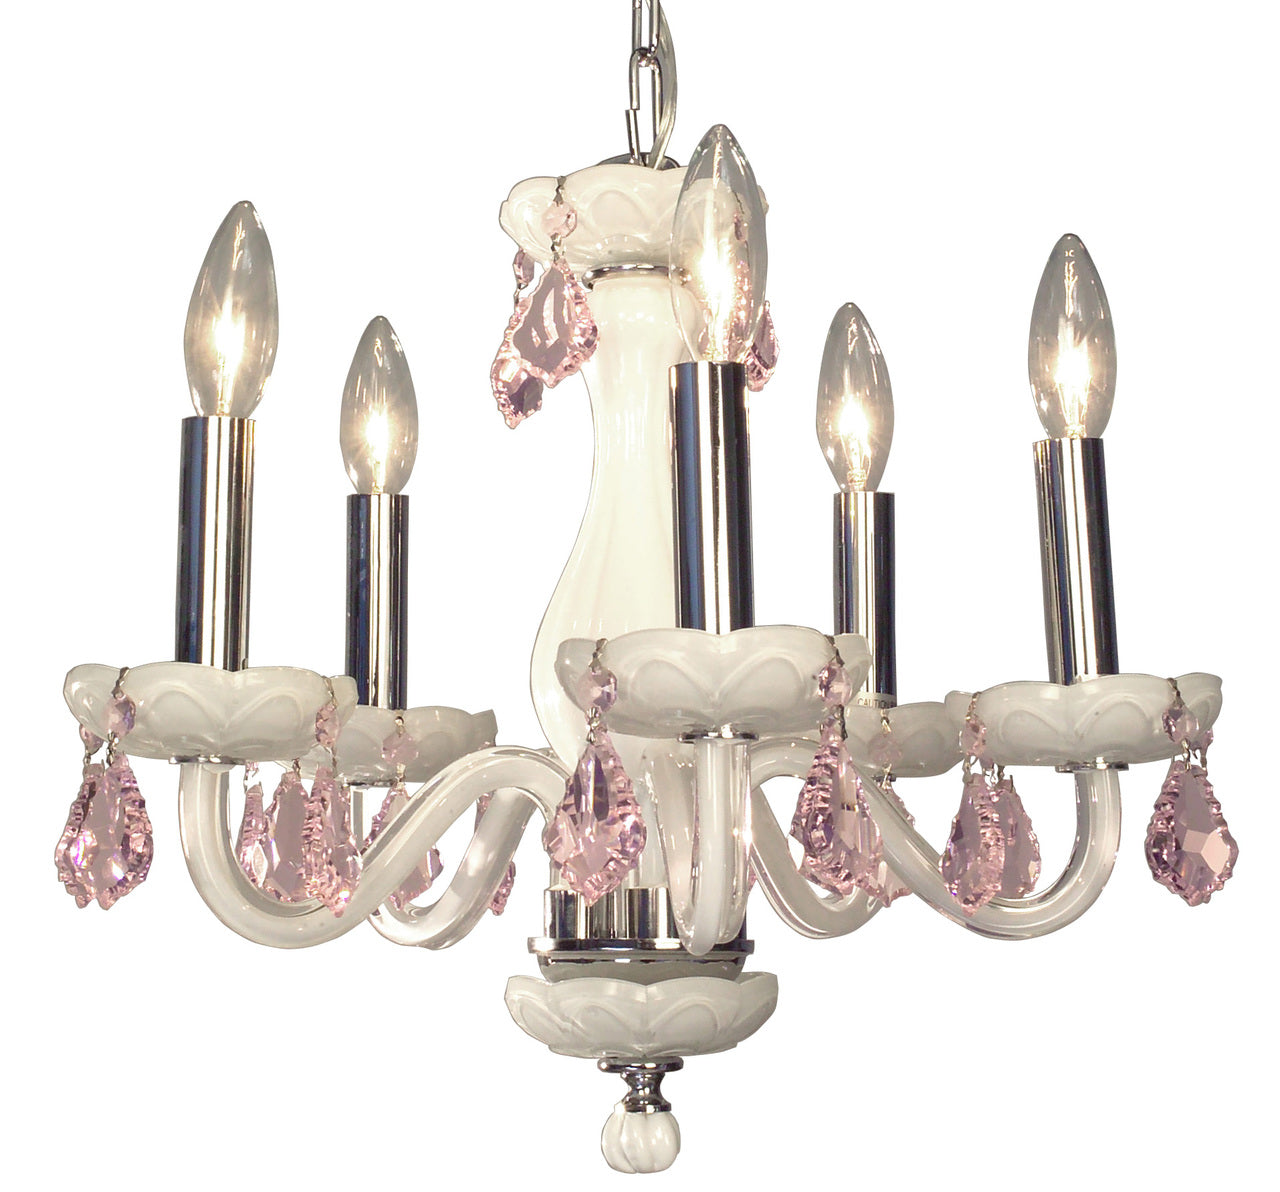 Classic Lighting 82045 WHT PNK Monaco Crystal Chandelier in White (Imported from Spain)